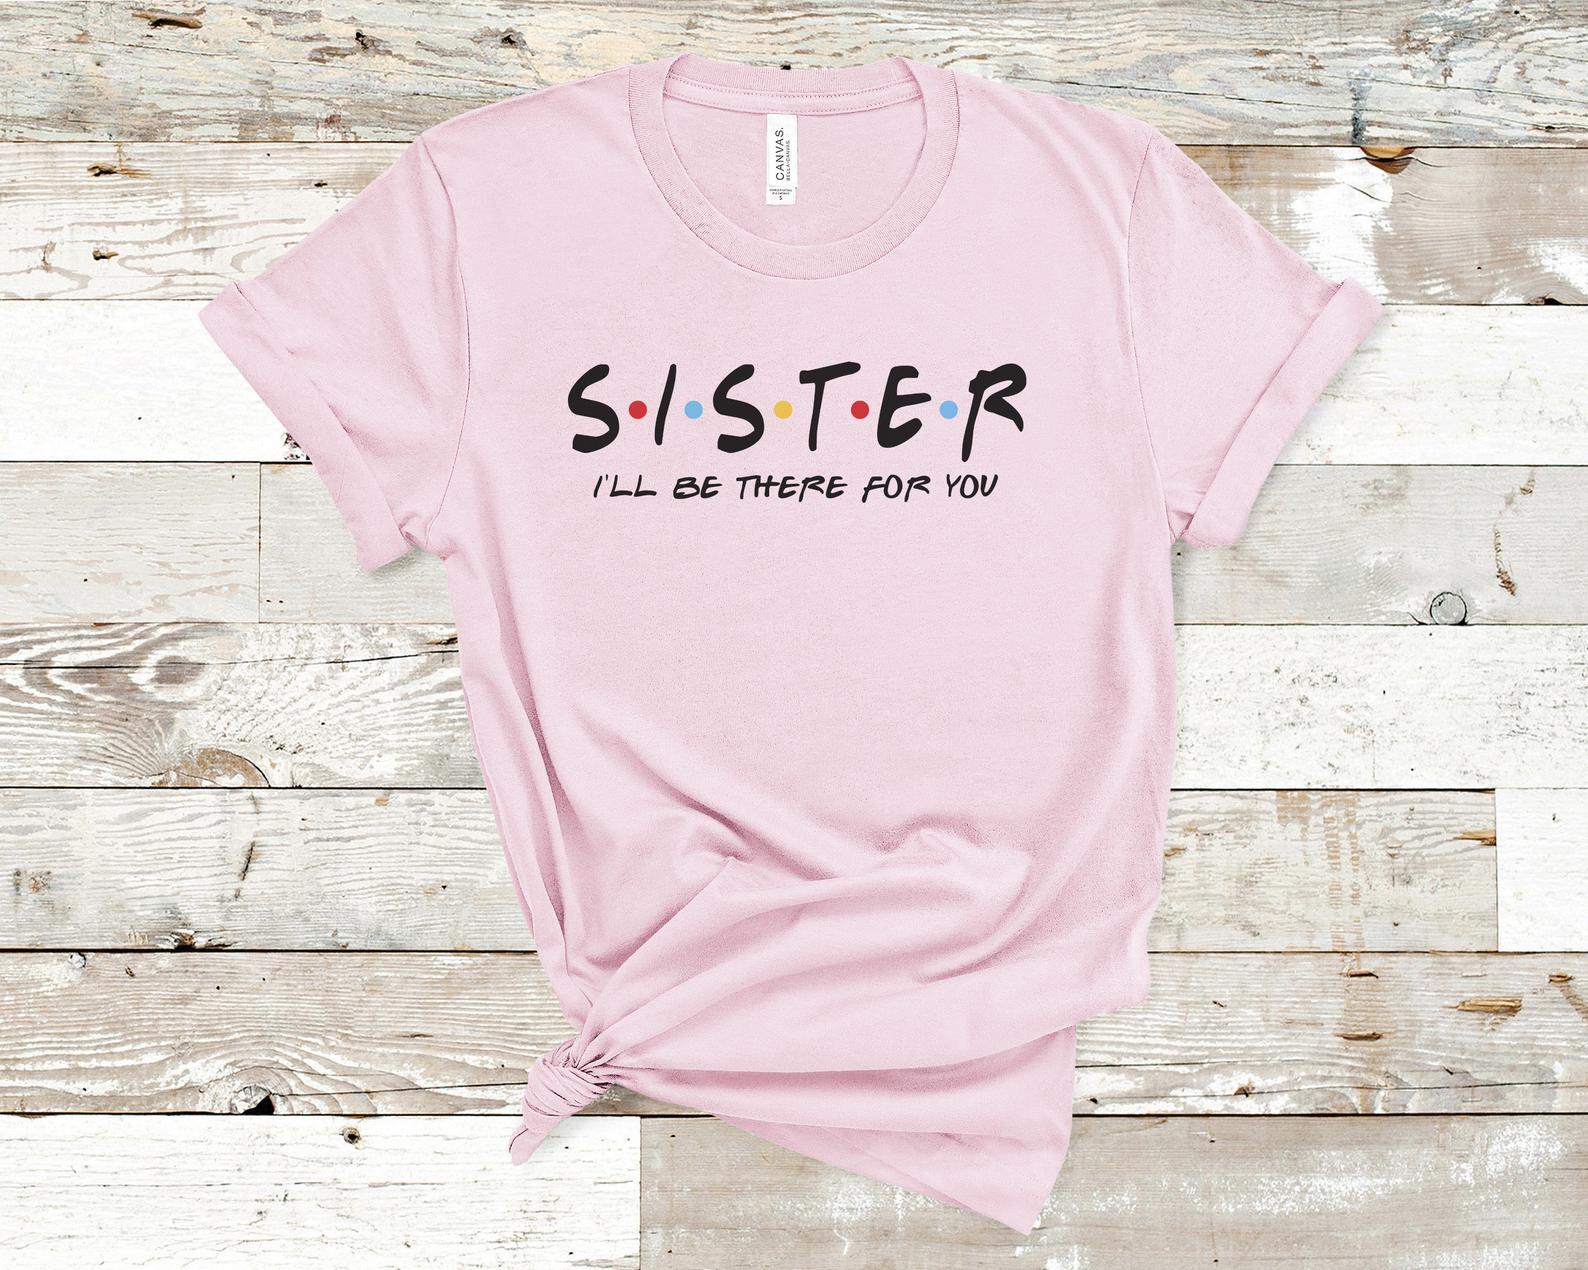 Sister I'll be there for you T-shirt